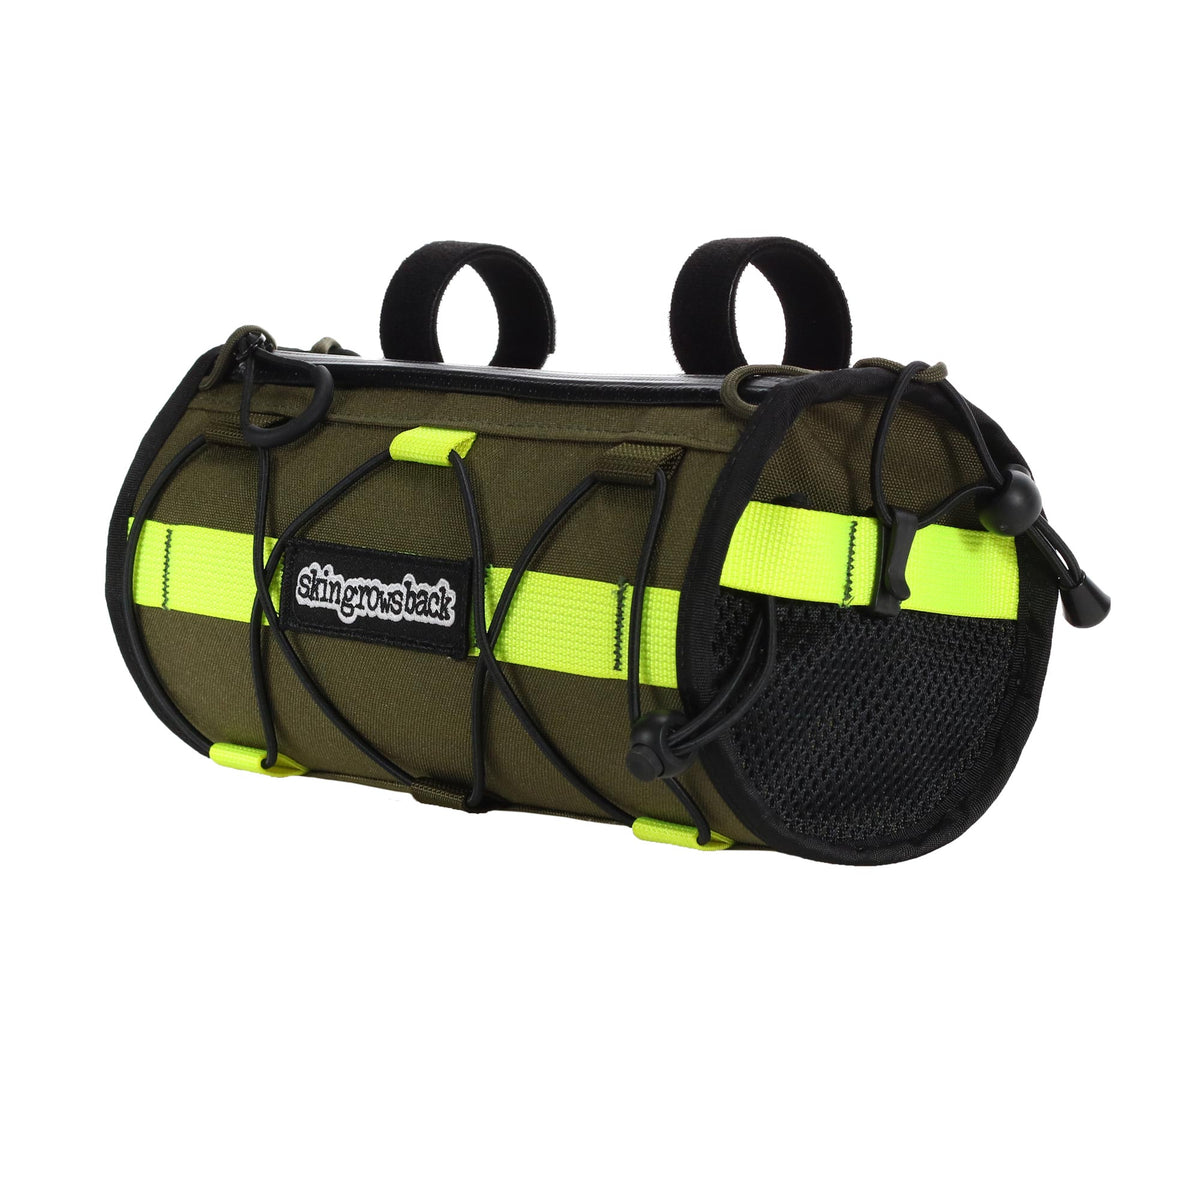 skingrowsback lunch box handlebar bag gravel cycling made in australia olive neon yellow